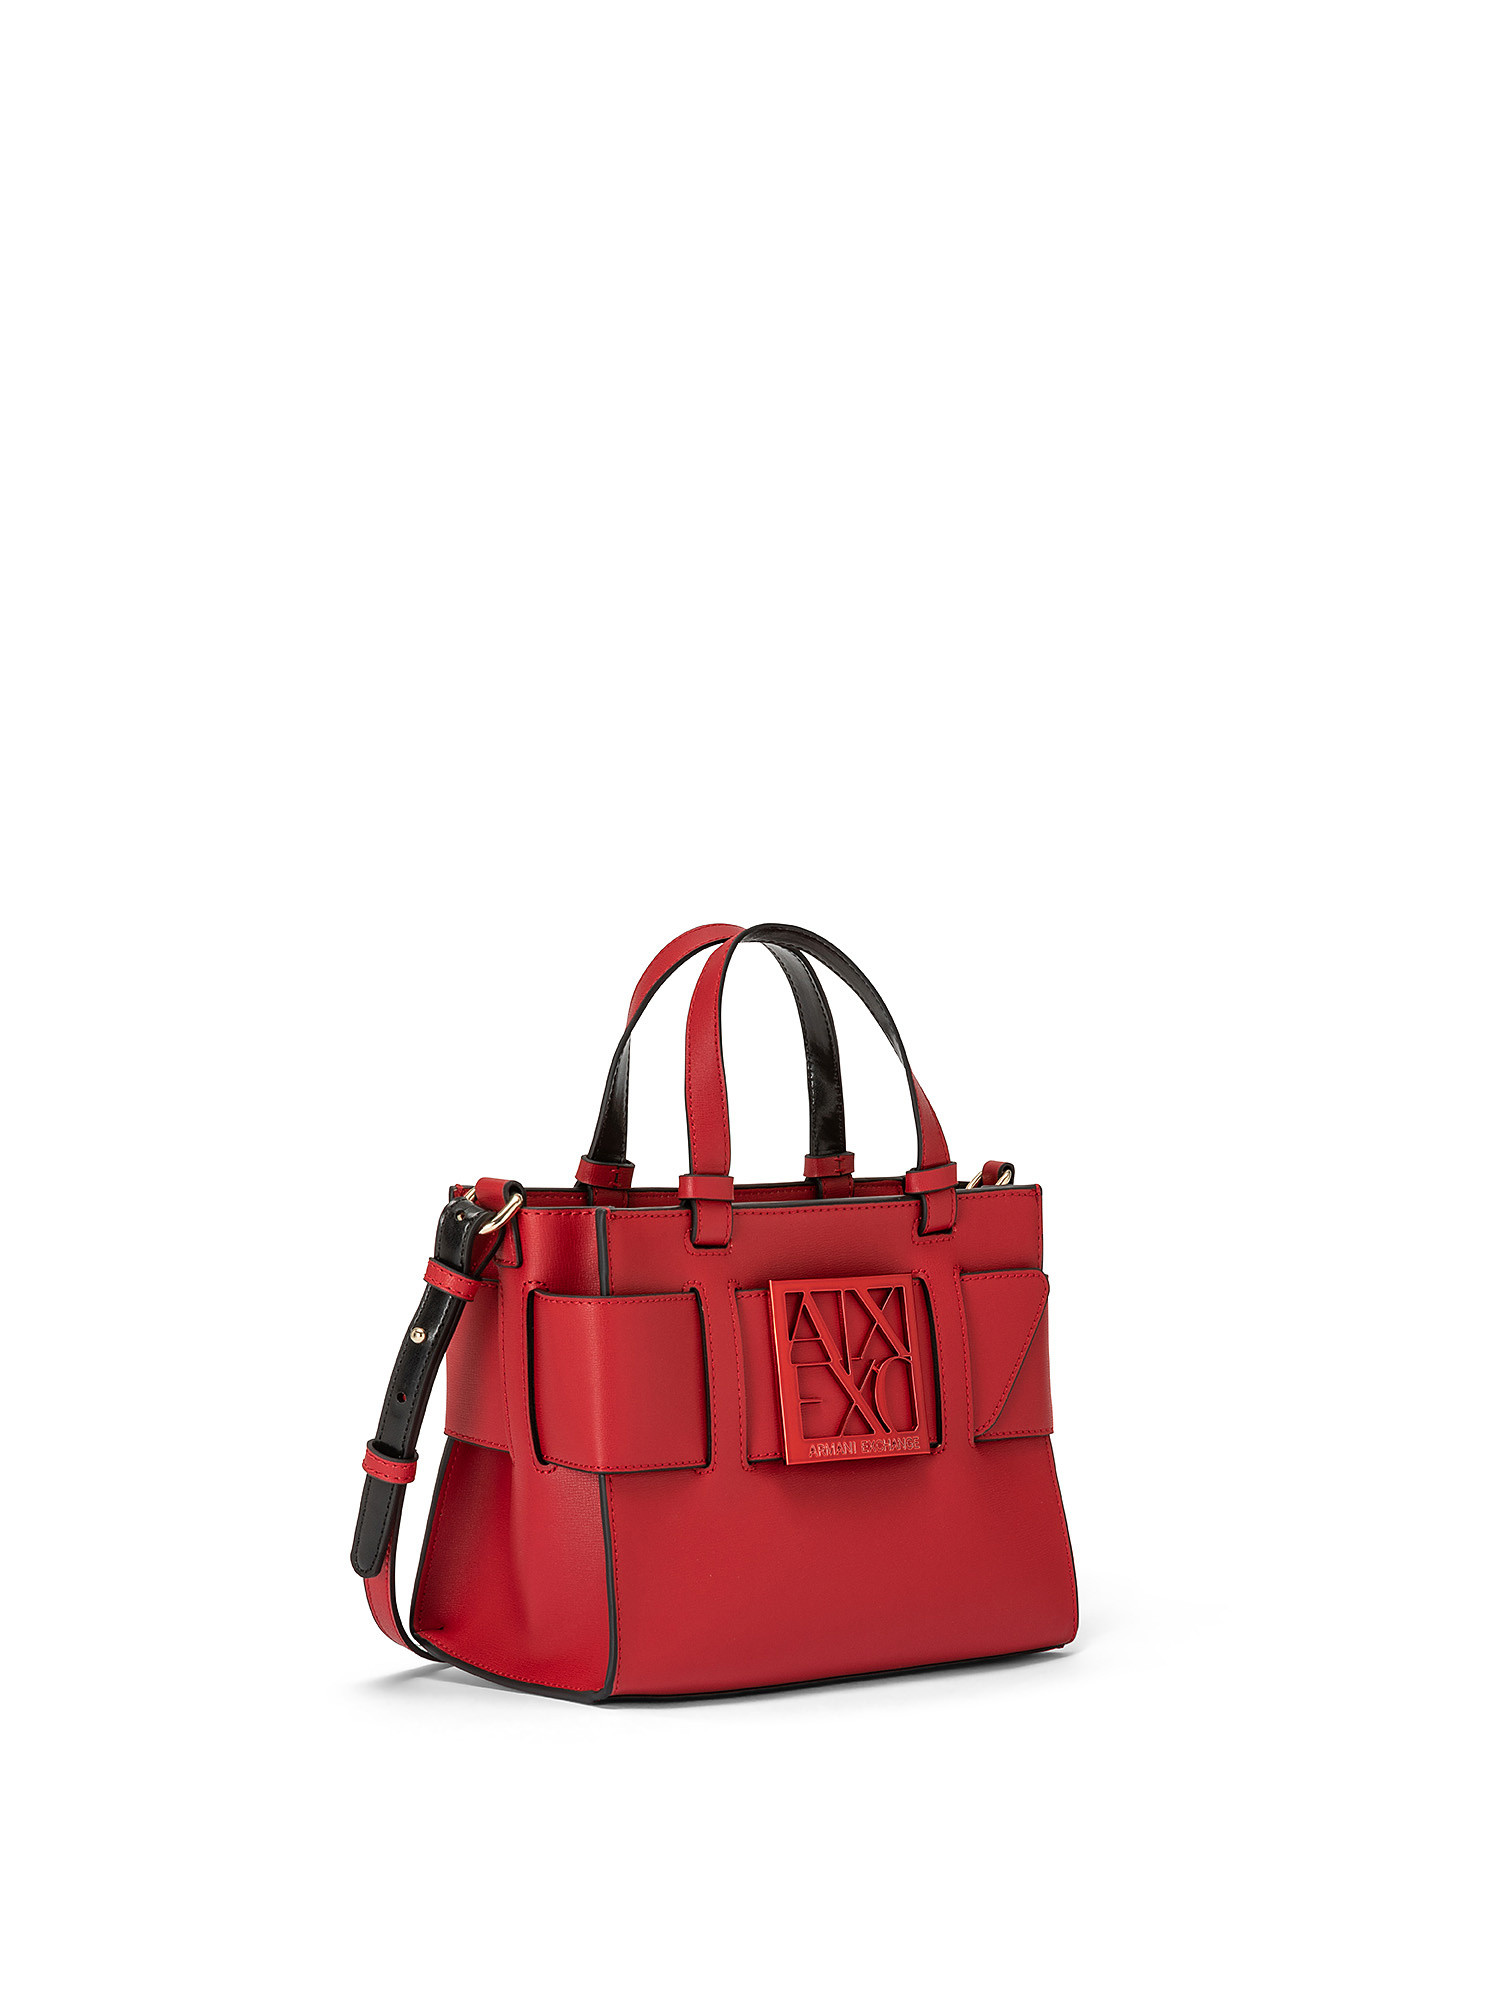 Borsa tote media, Rosso, large image number 1